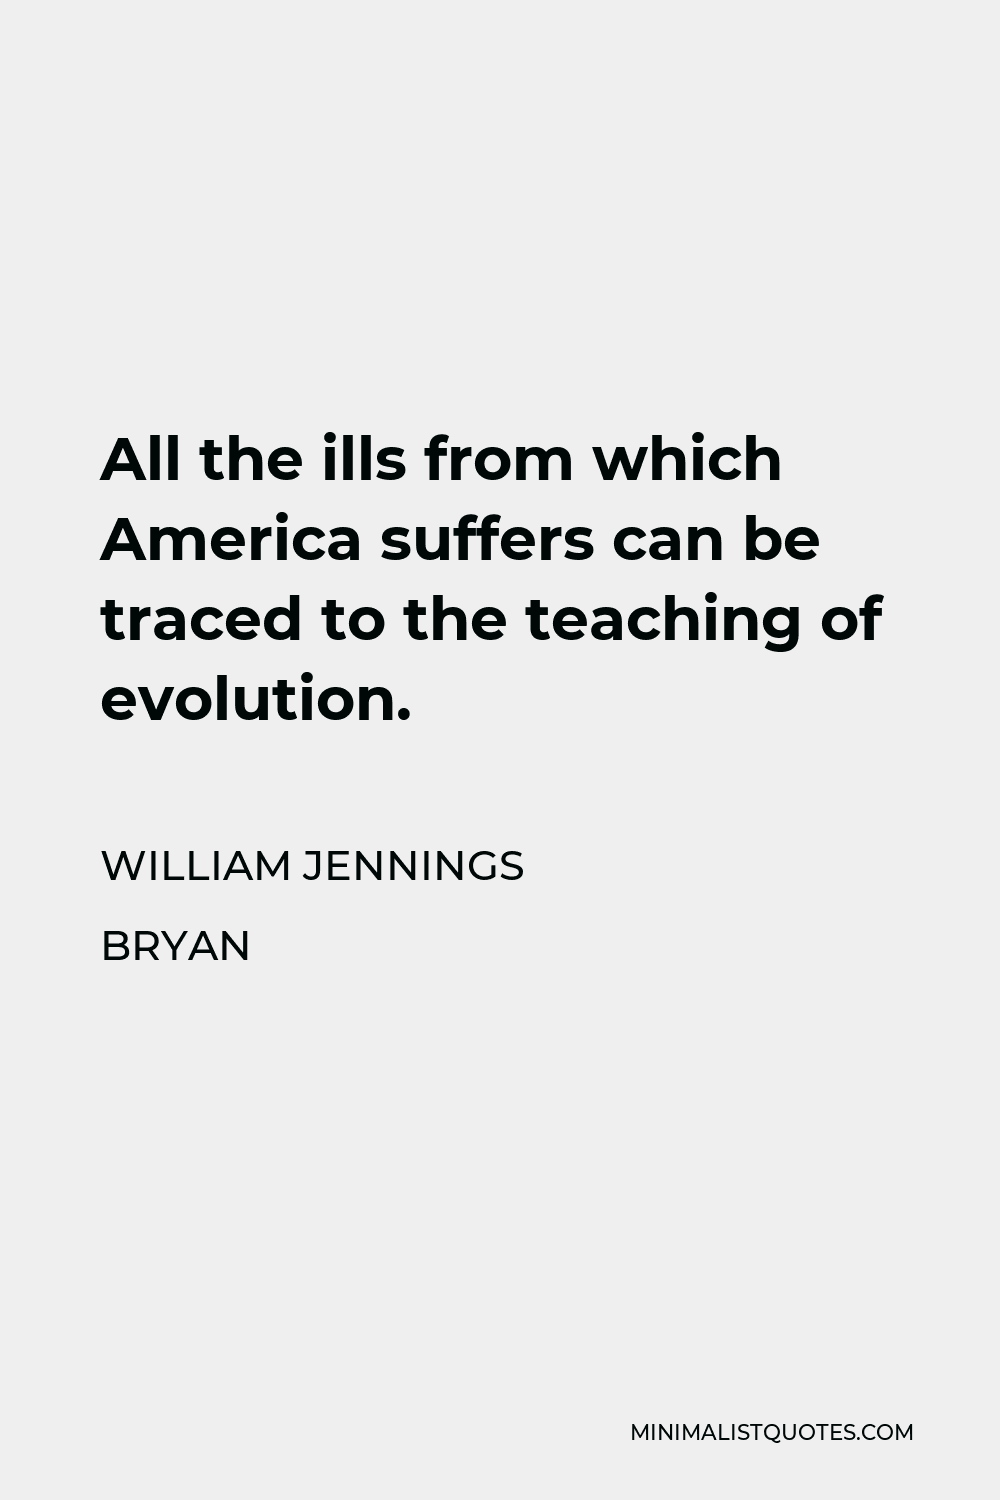 William Jennings Bryan Quote - All the ills from which America suffers can be traced to the teaching of evolution.